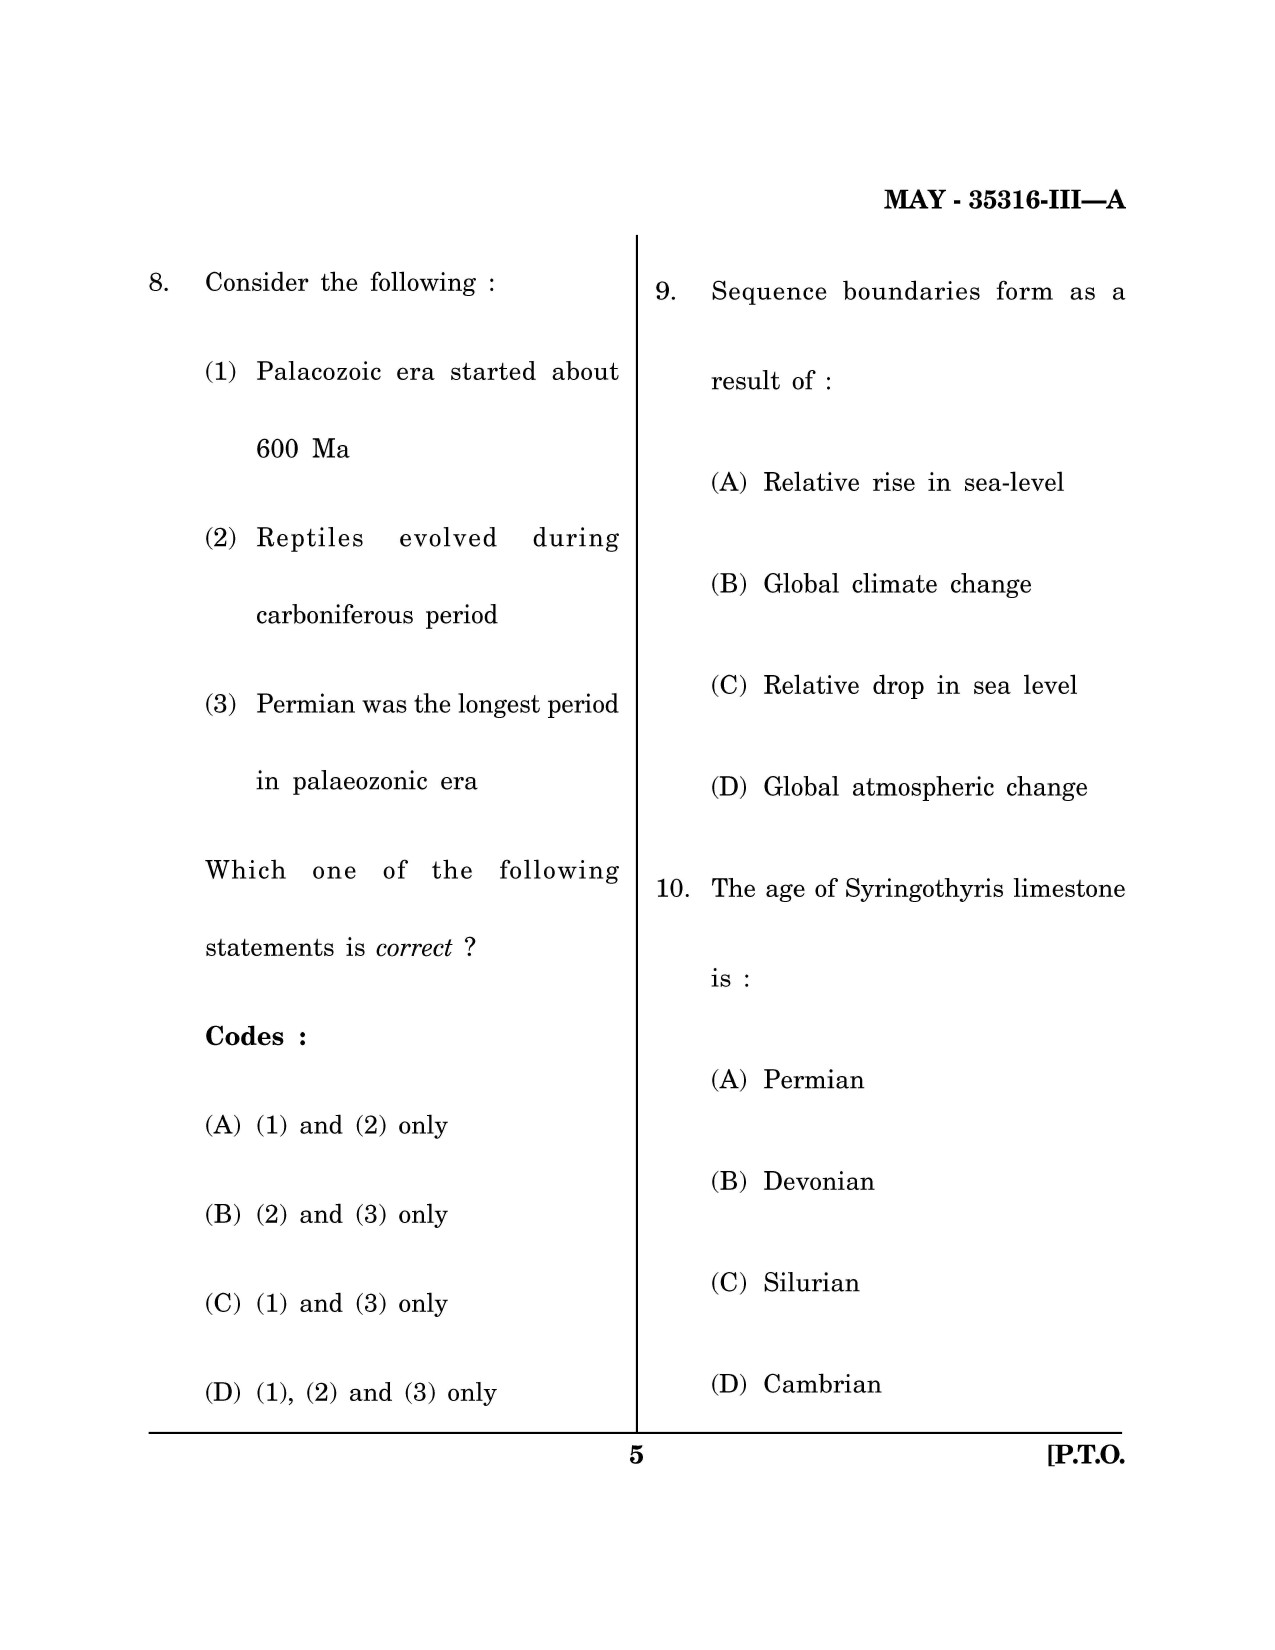 Maharashtra SET Earth Atmospheric Ocean Planetary Science Question Paper III May 2016 4